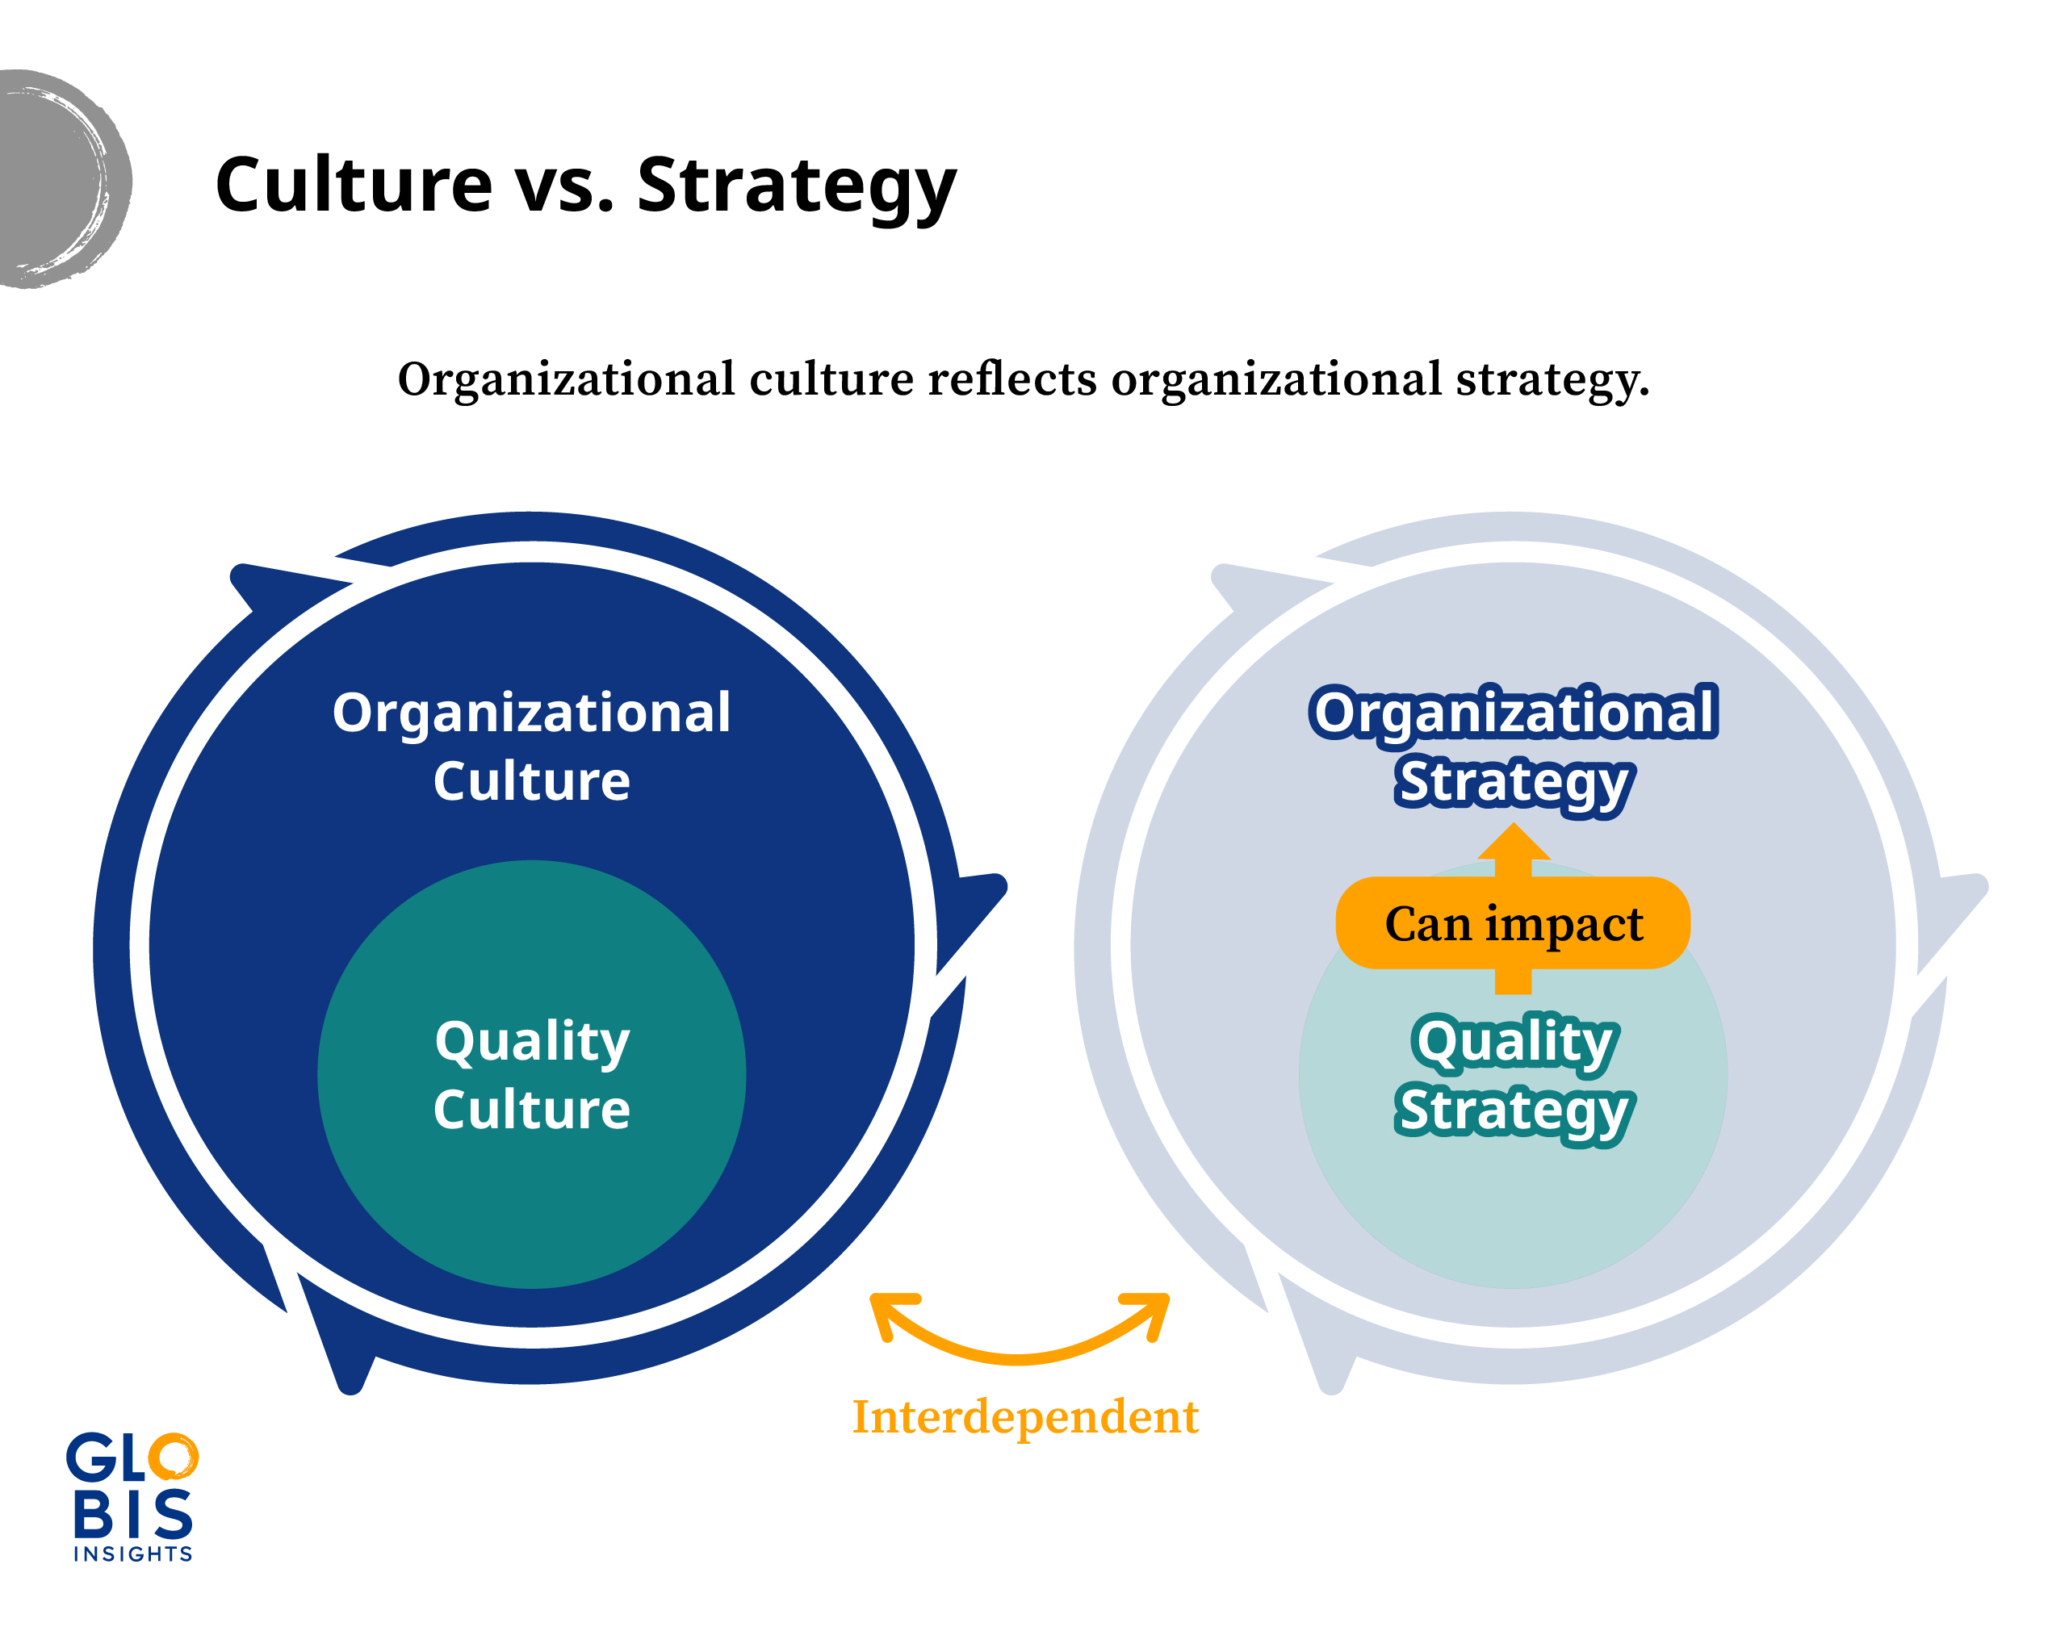 Infographic showing the connections between organizational culture and quality culture, as well as organizational strategy and quality strategy